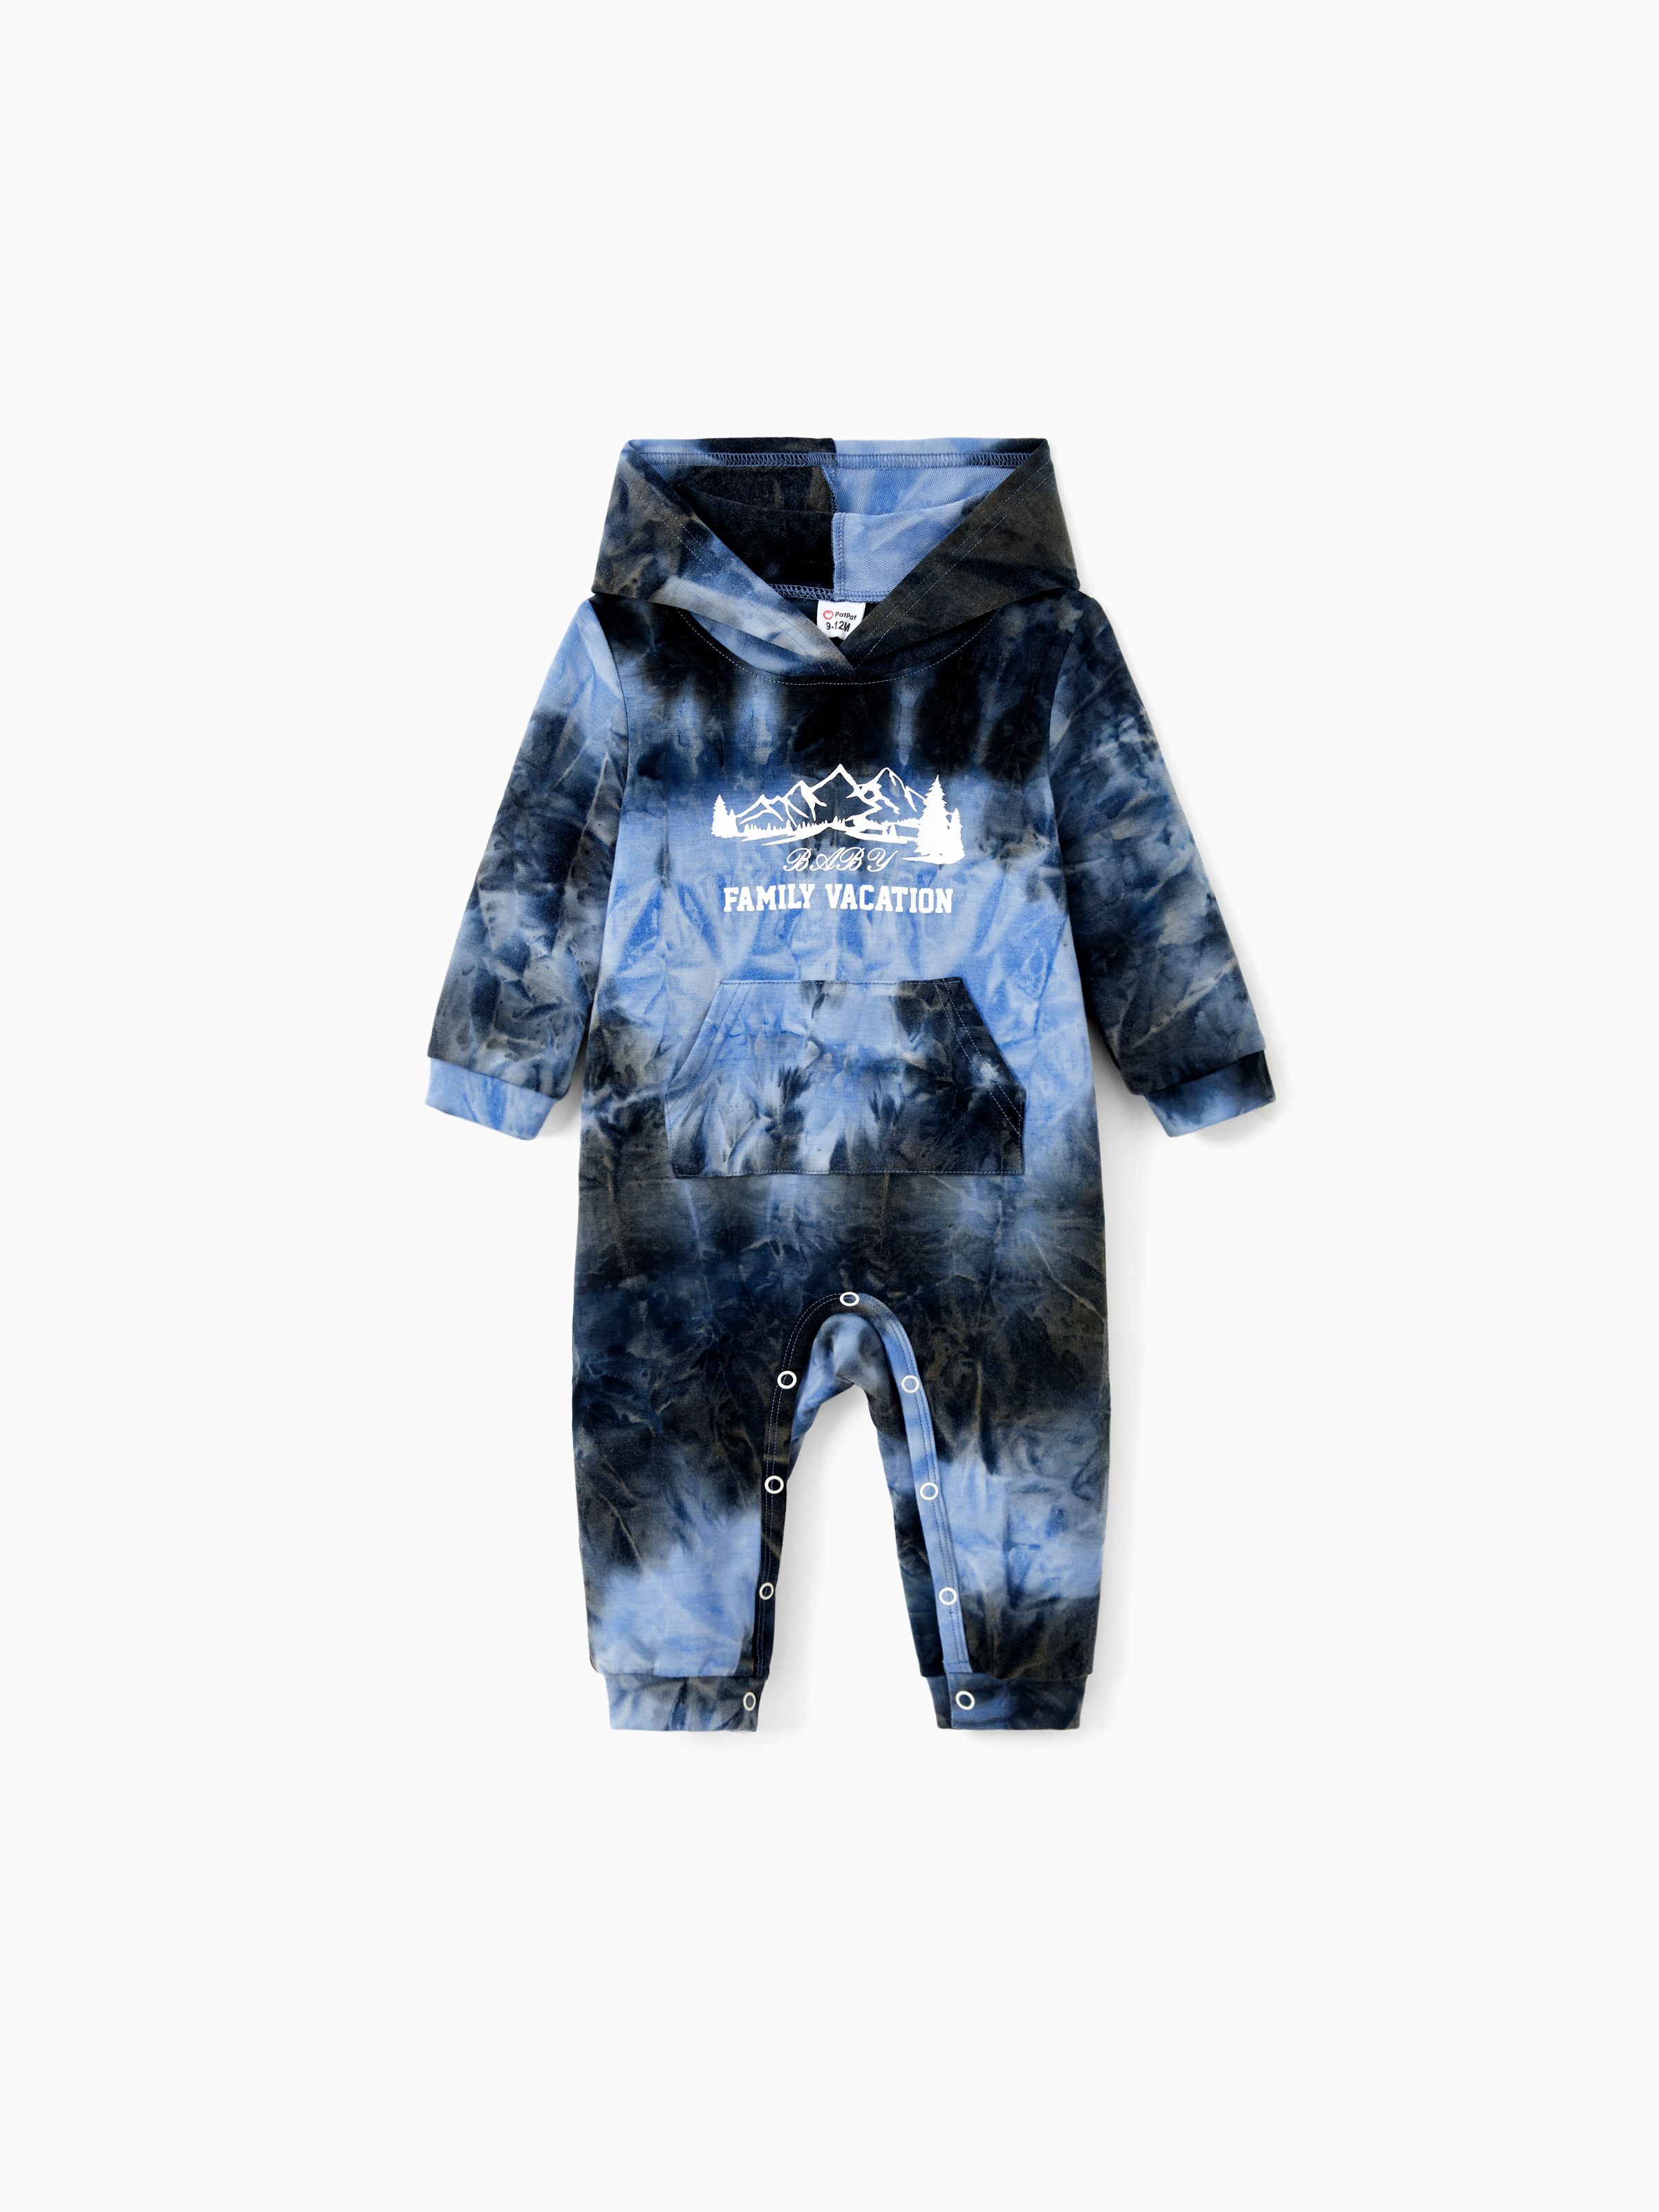 

Family Matching Tops Blue-Black Tie-Dye Family Vacation Drawstring Hoodie with Pockets